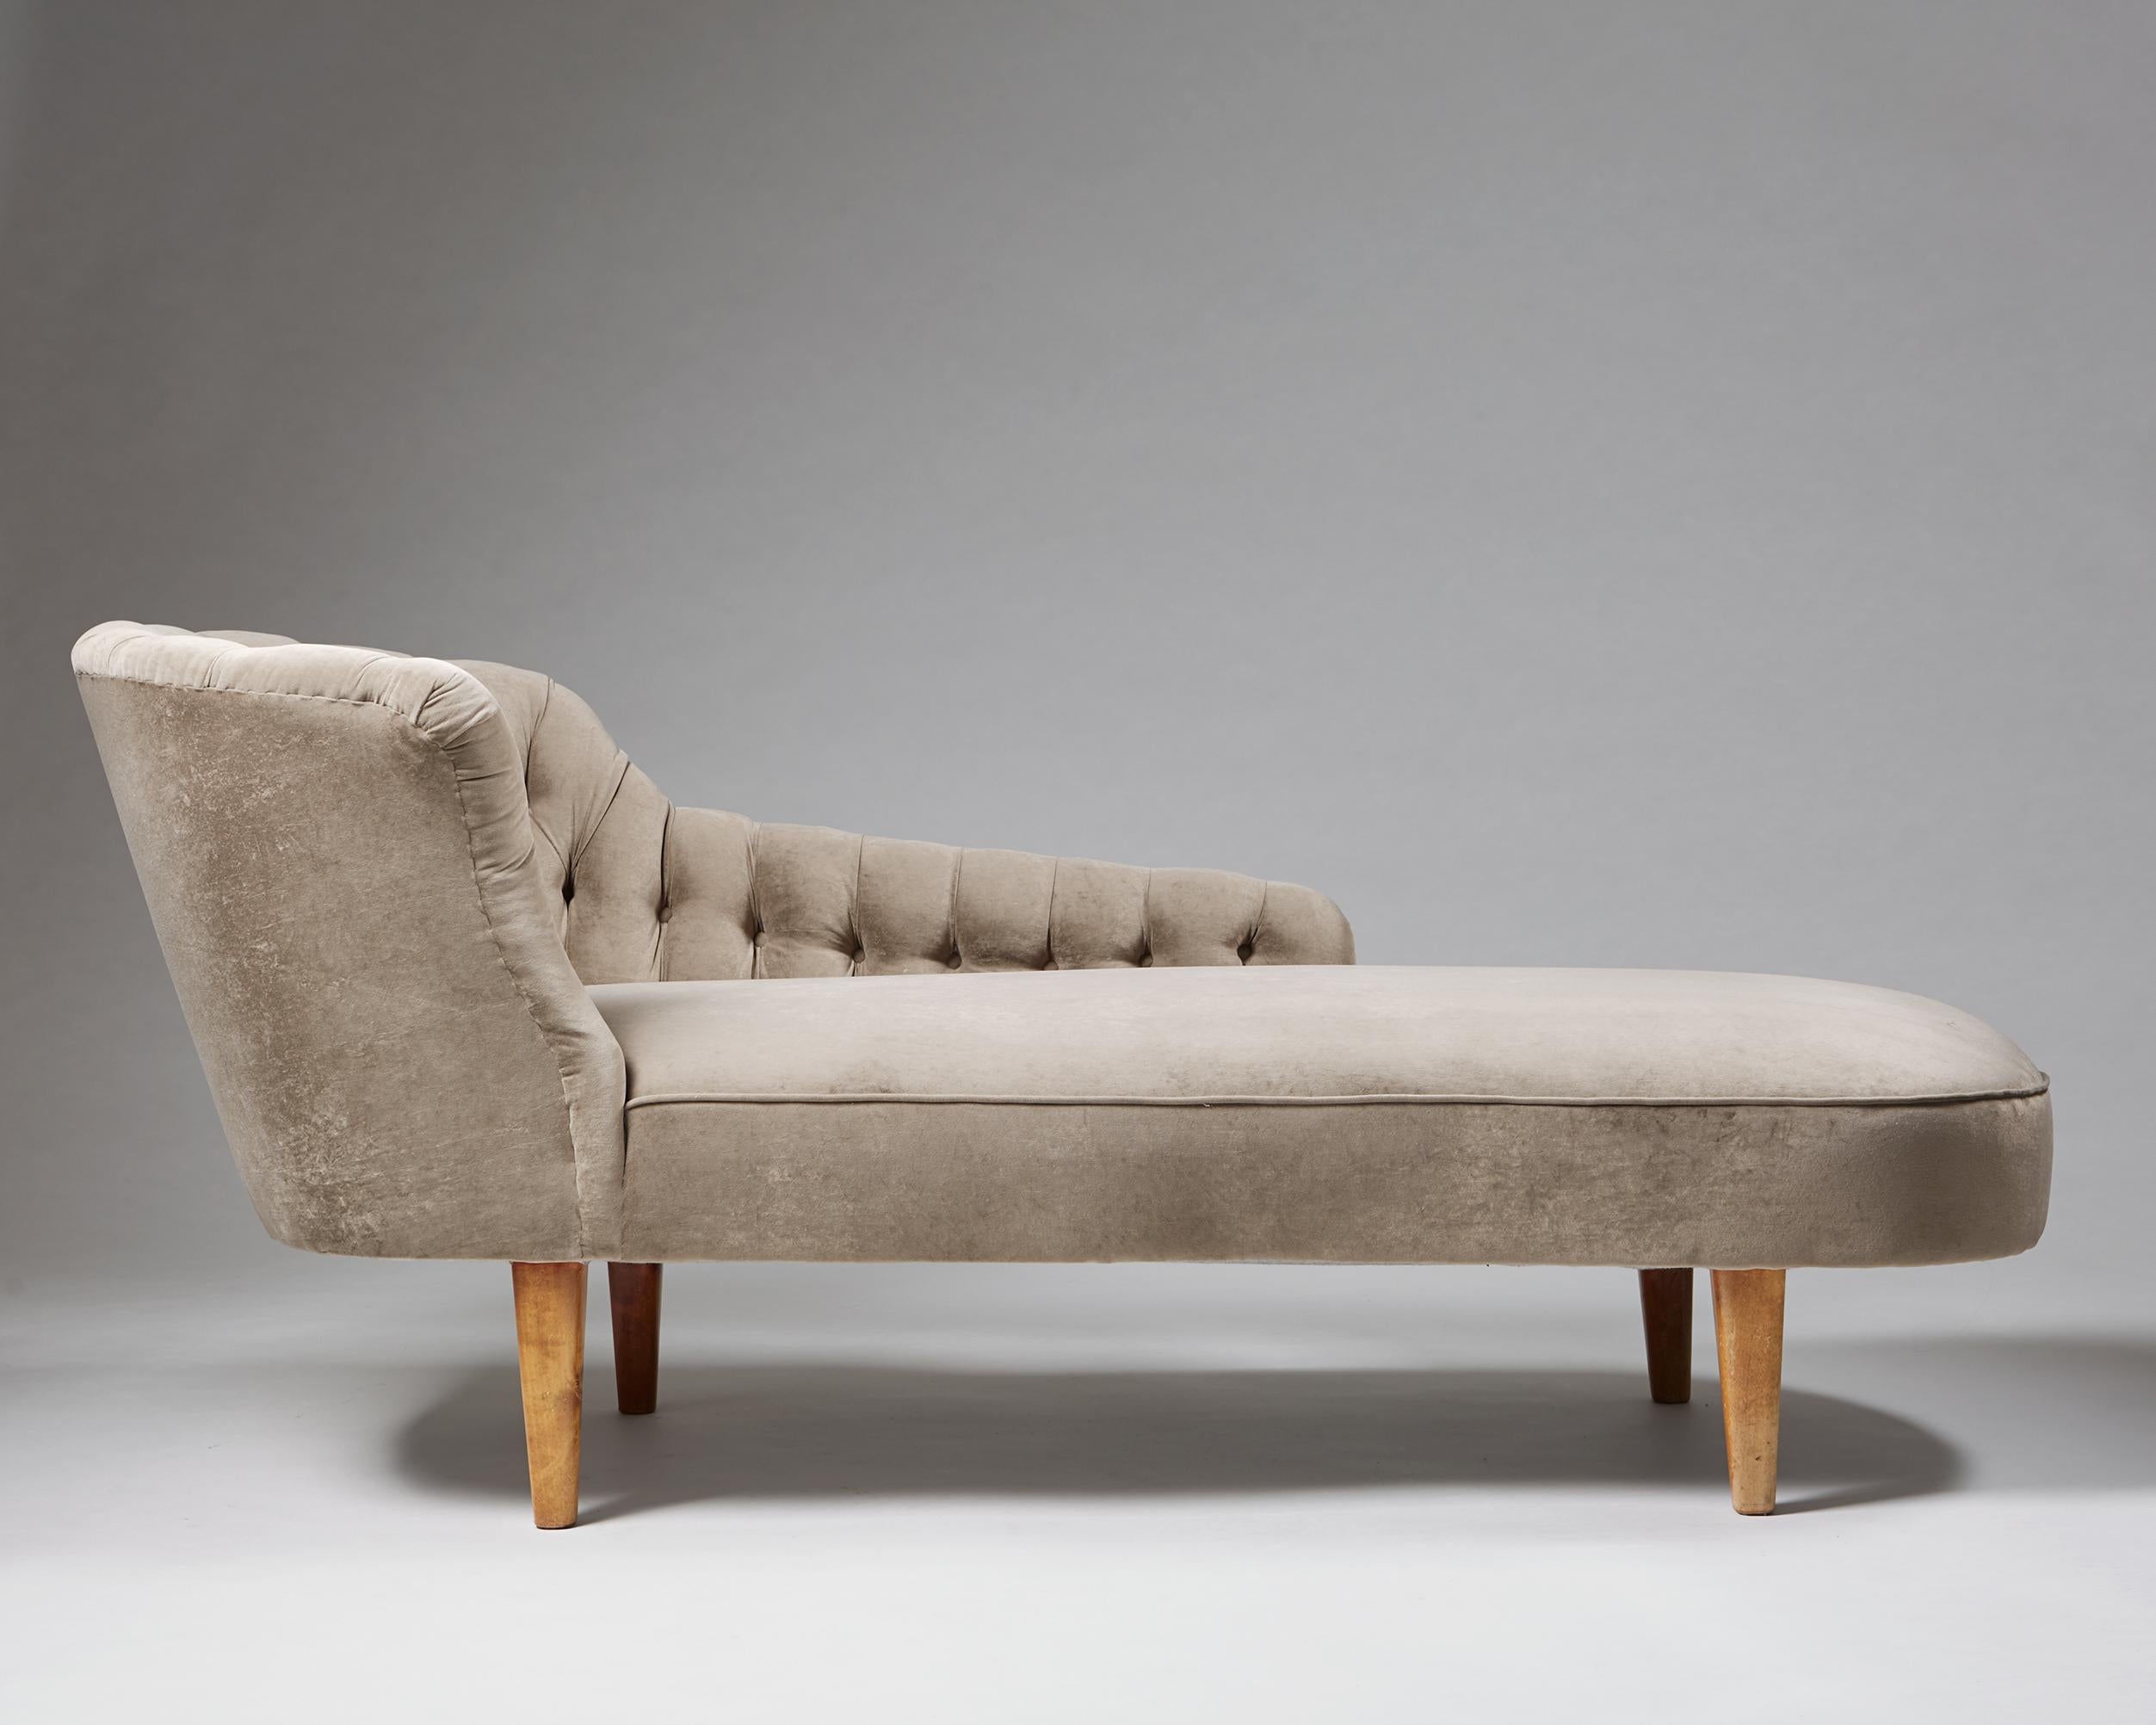 Swedish Chaise Longue Attributed to Greta Magnusson-Grossman, Sweden, 1950s